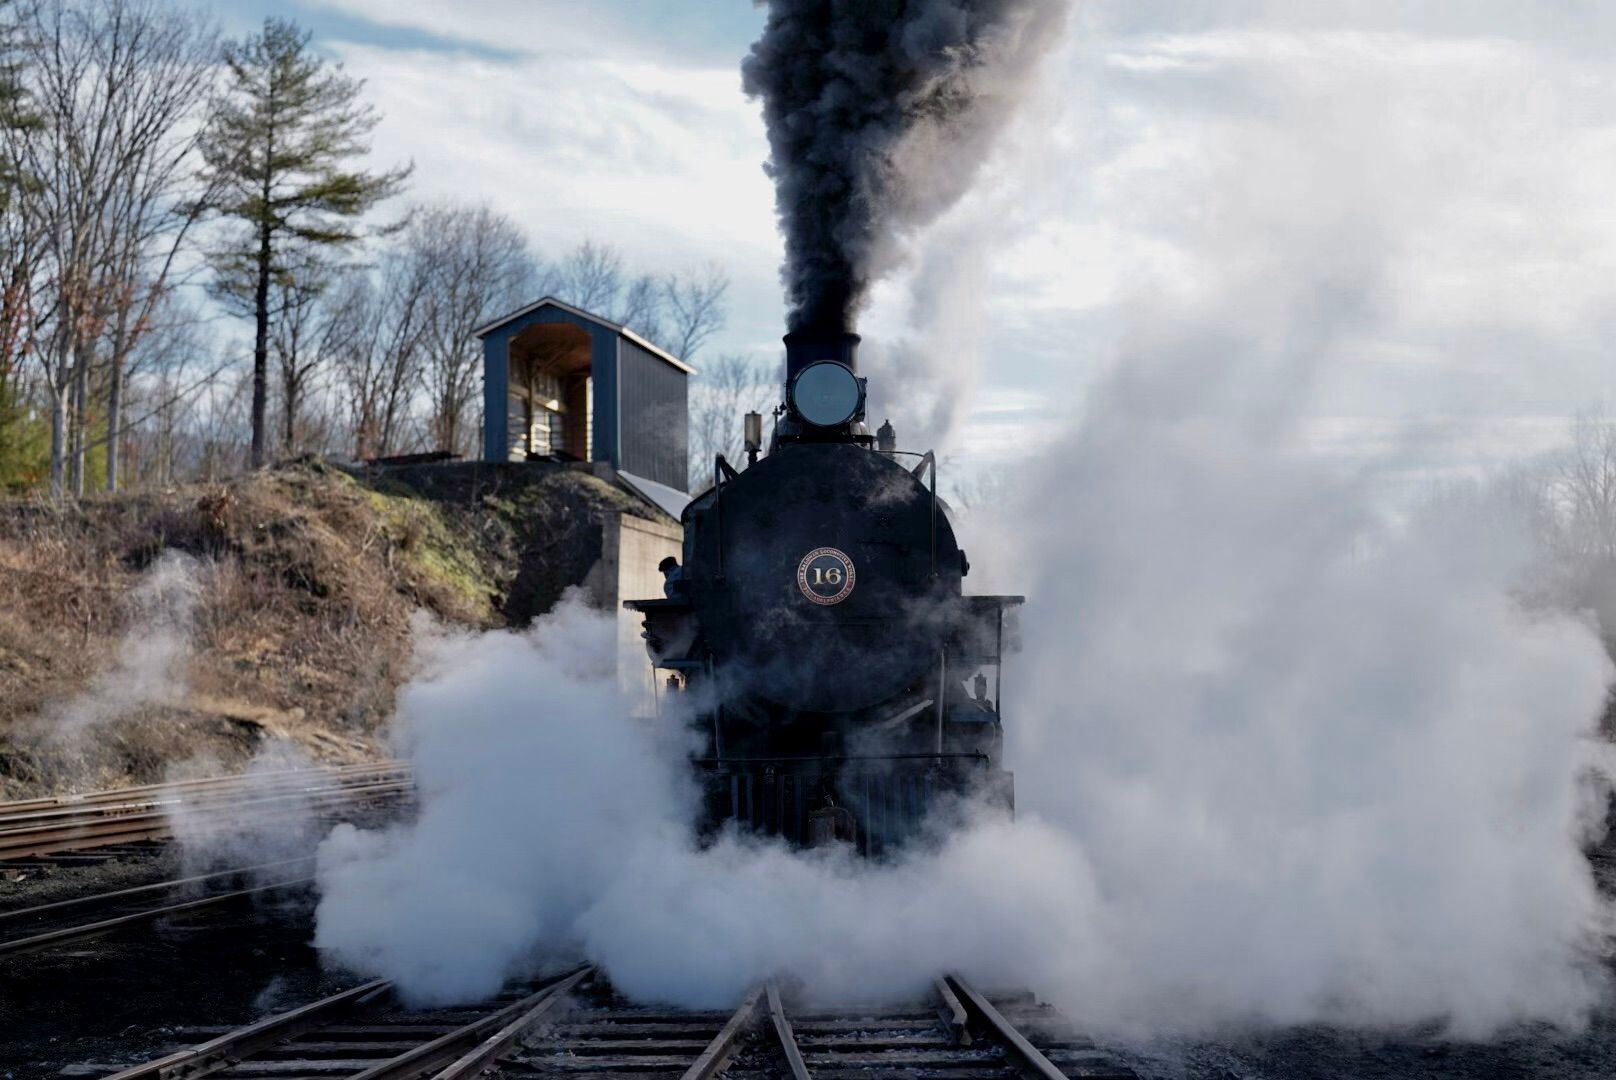 A century-old Philly steam-engine rides again at a historic railroad station